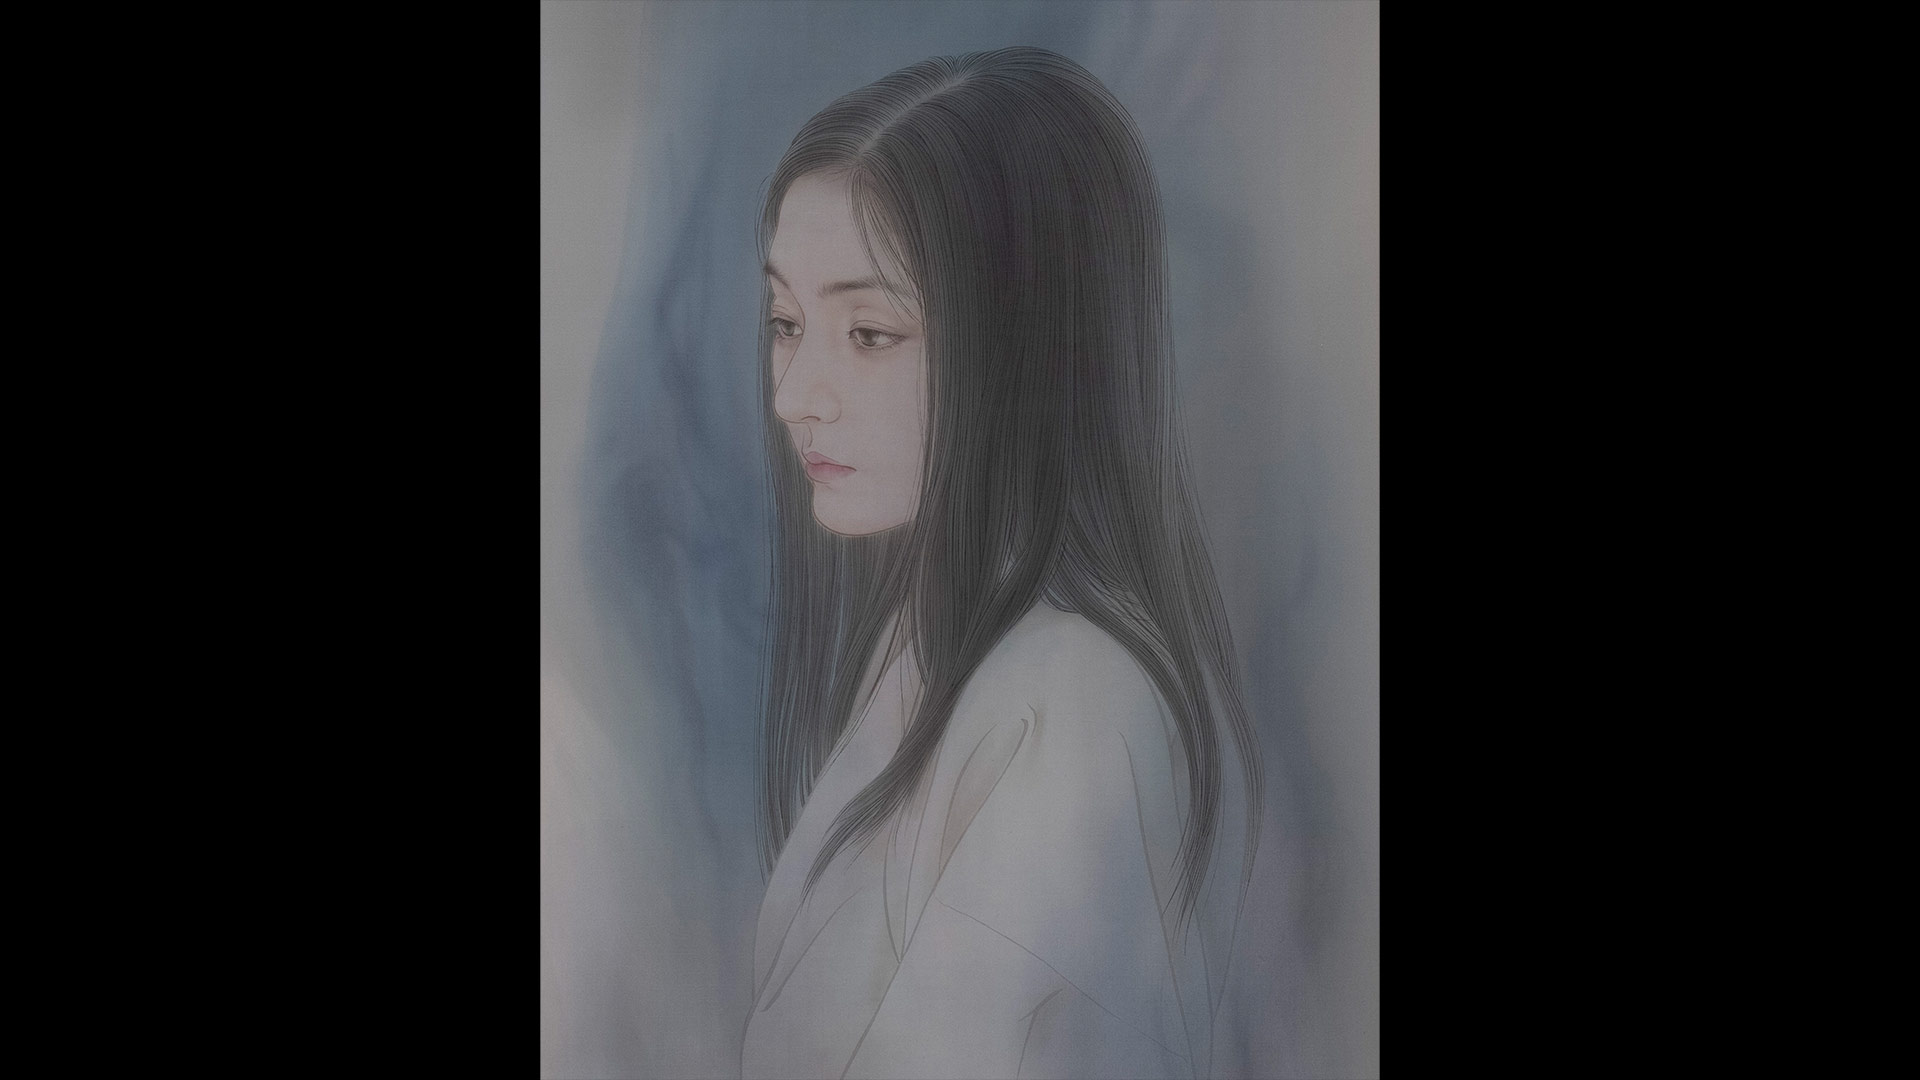 Commencement Festival - Part 127 - Emi Miyako Exhibition - The Gaze of Painting